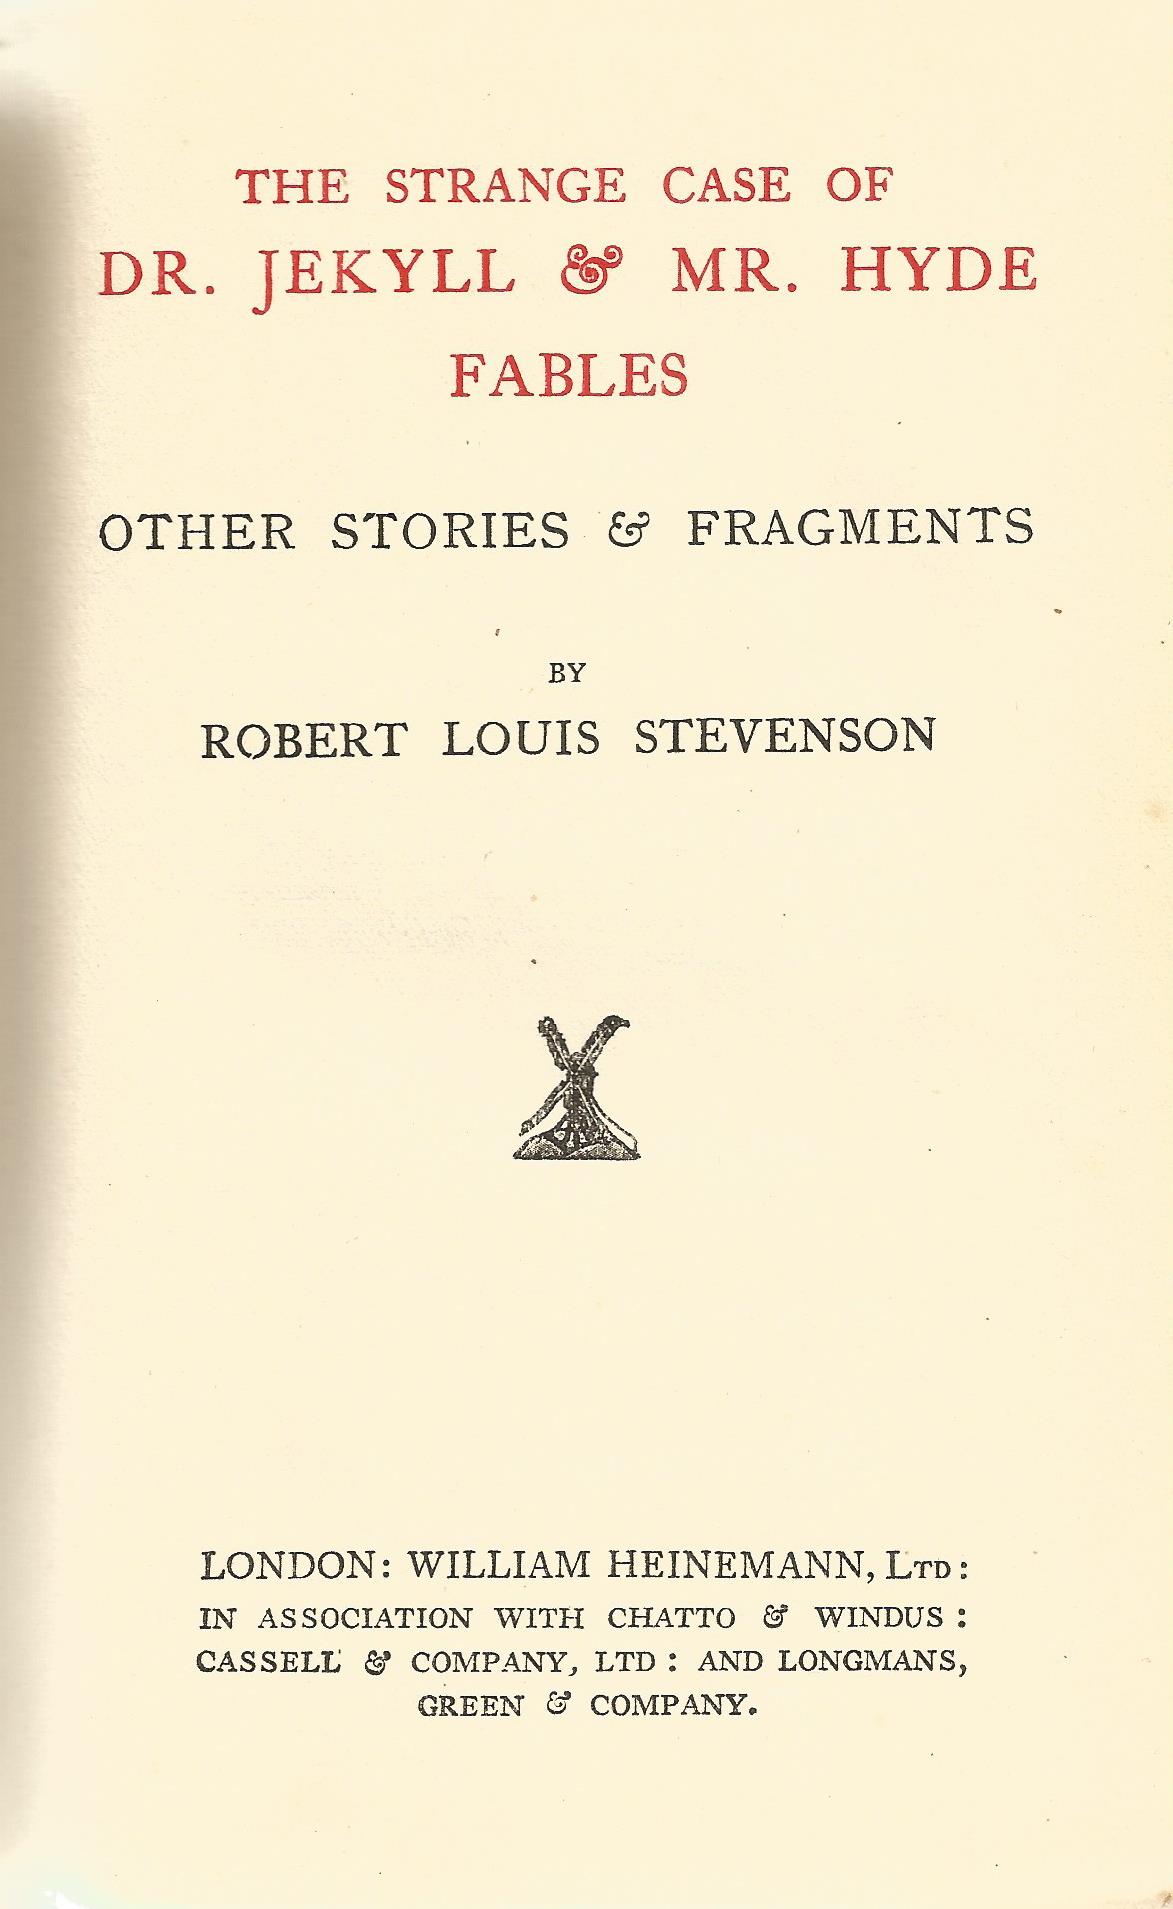 The Strange Case of Dr Jekyll and Mr Hyde Fables by Robert Louis Stevenson 1925 Hardback Book - Image 2 of 3